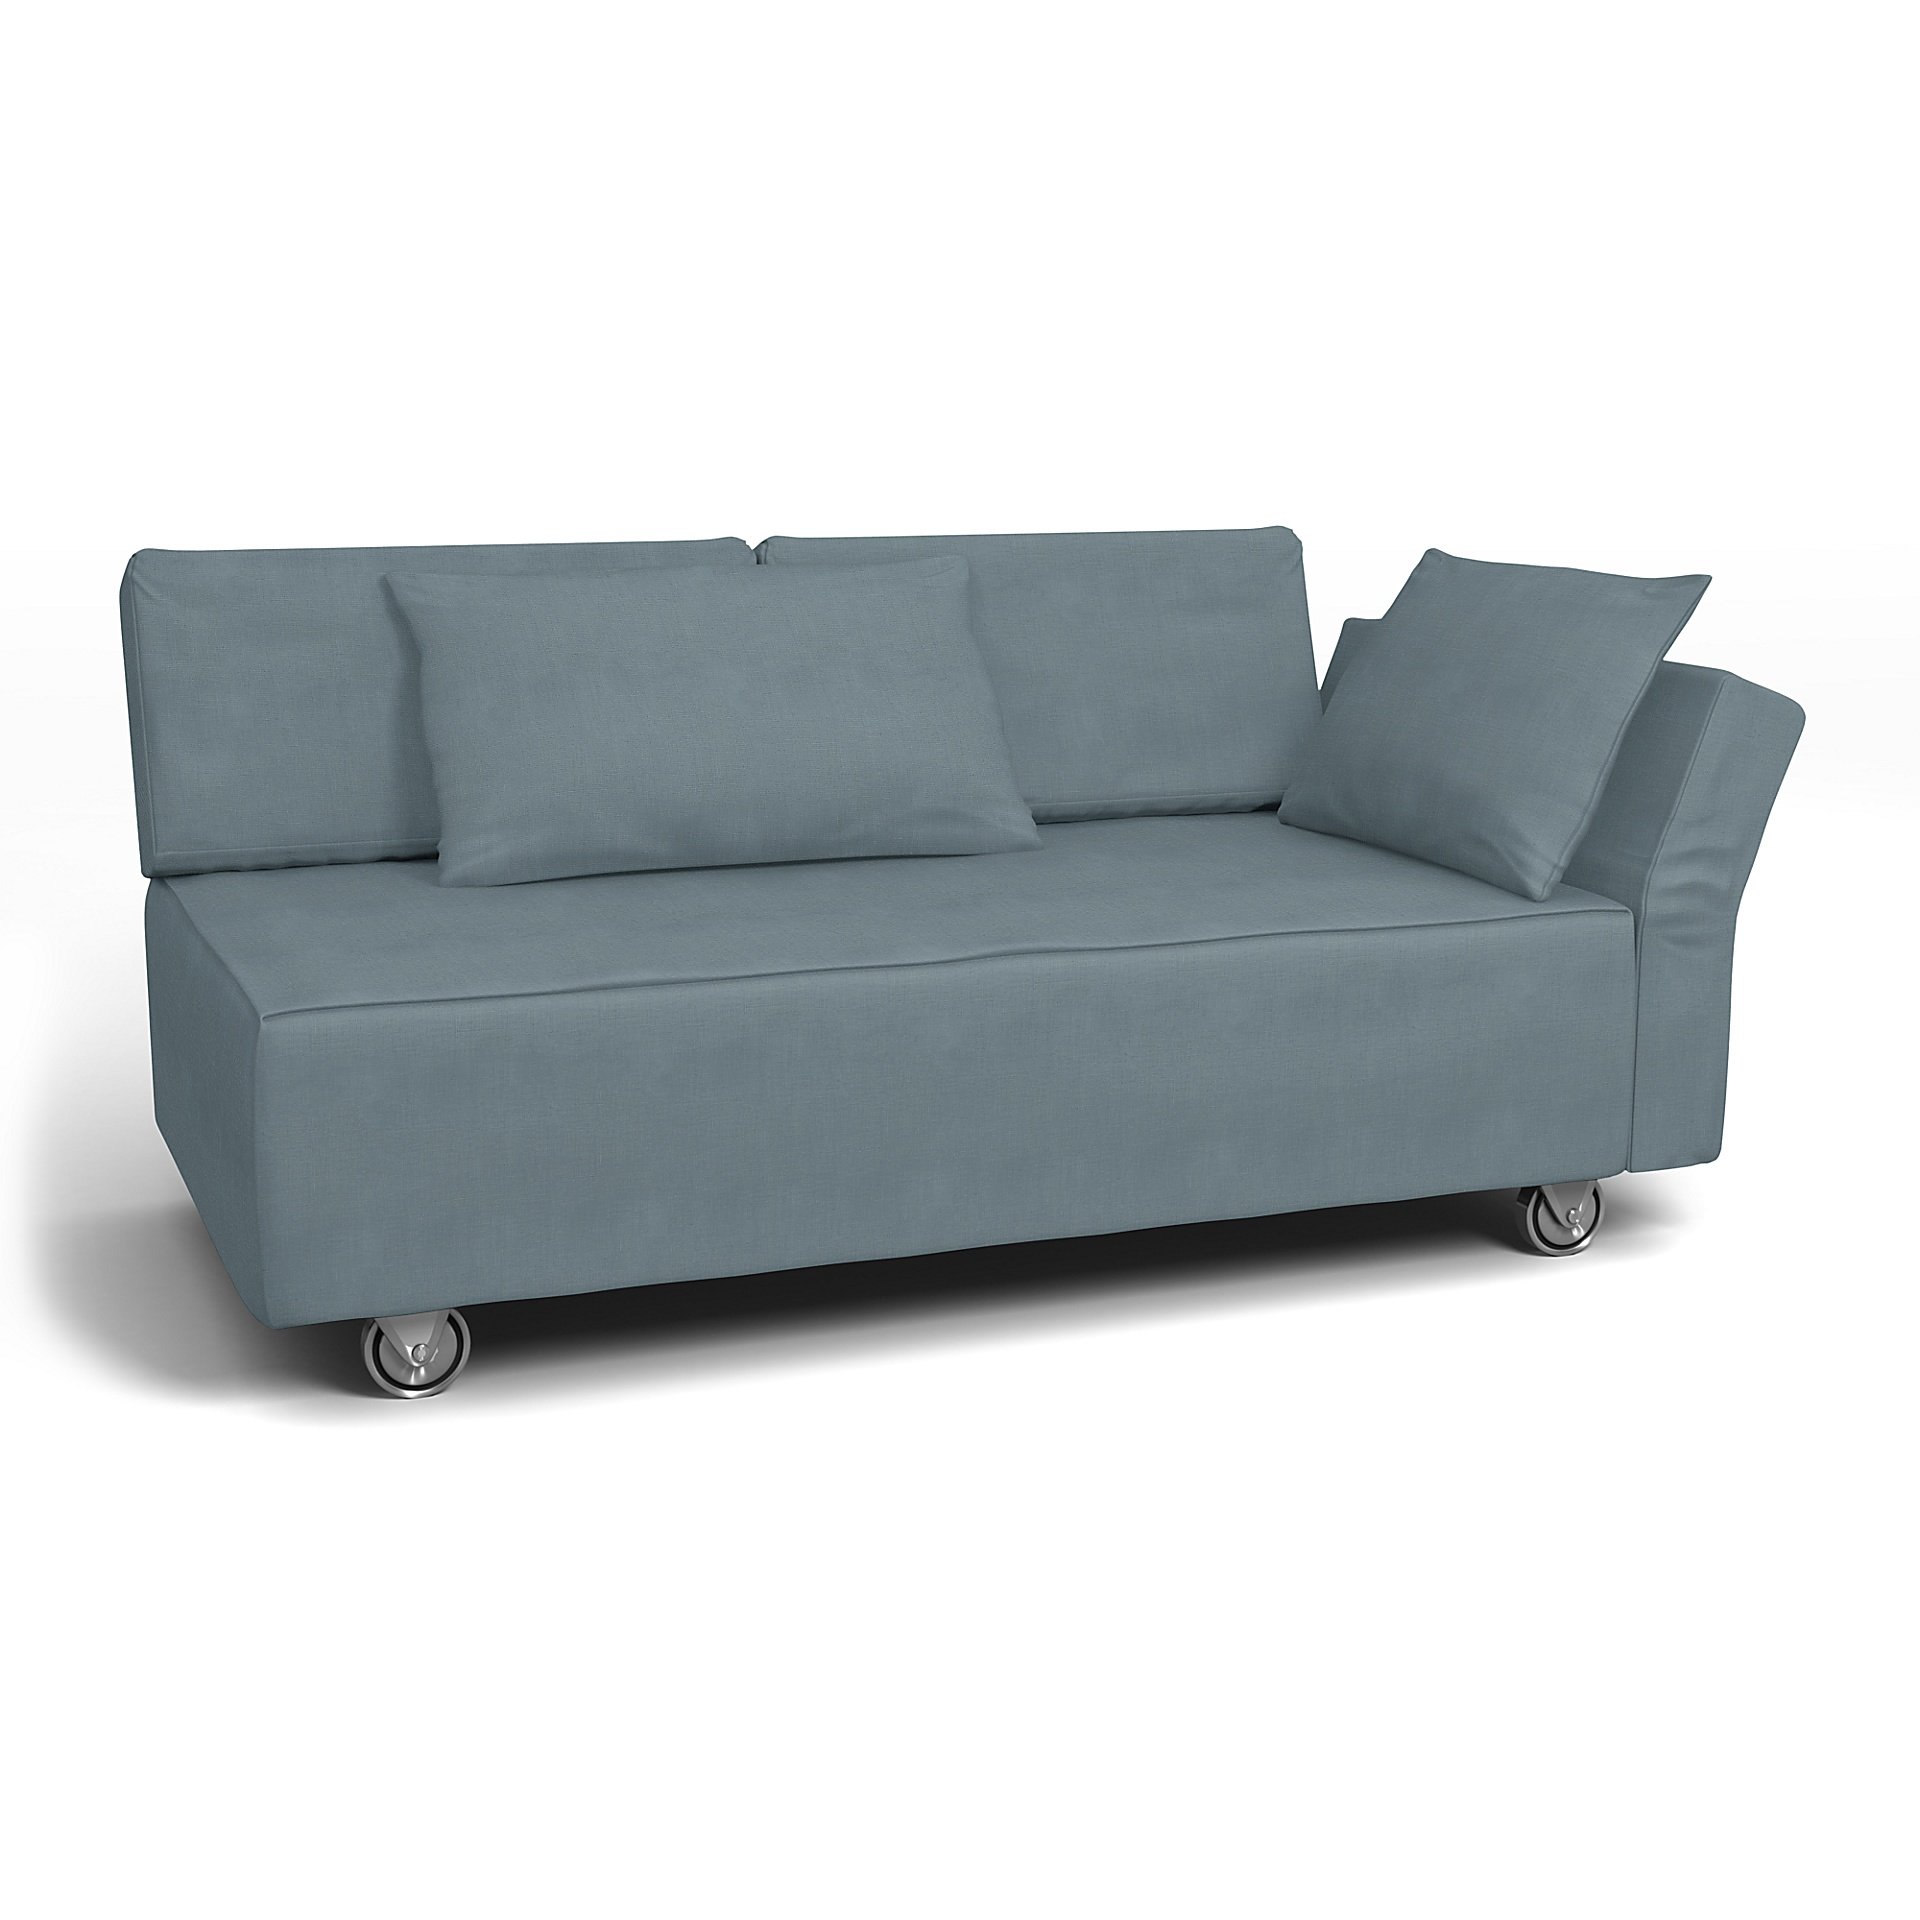 IKEA - Falsterbo 2 Seat Sofa with Right Arm Cover, Dusk, Linen - Bemz